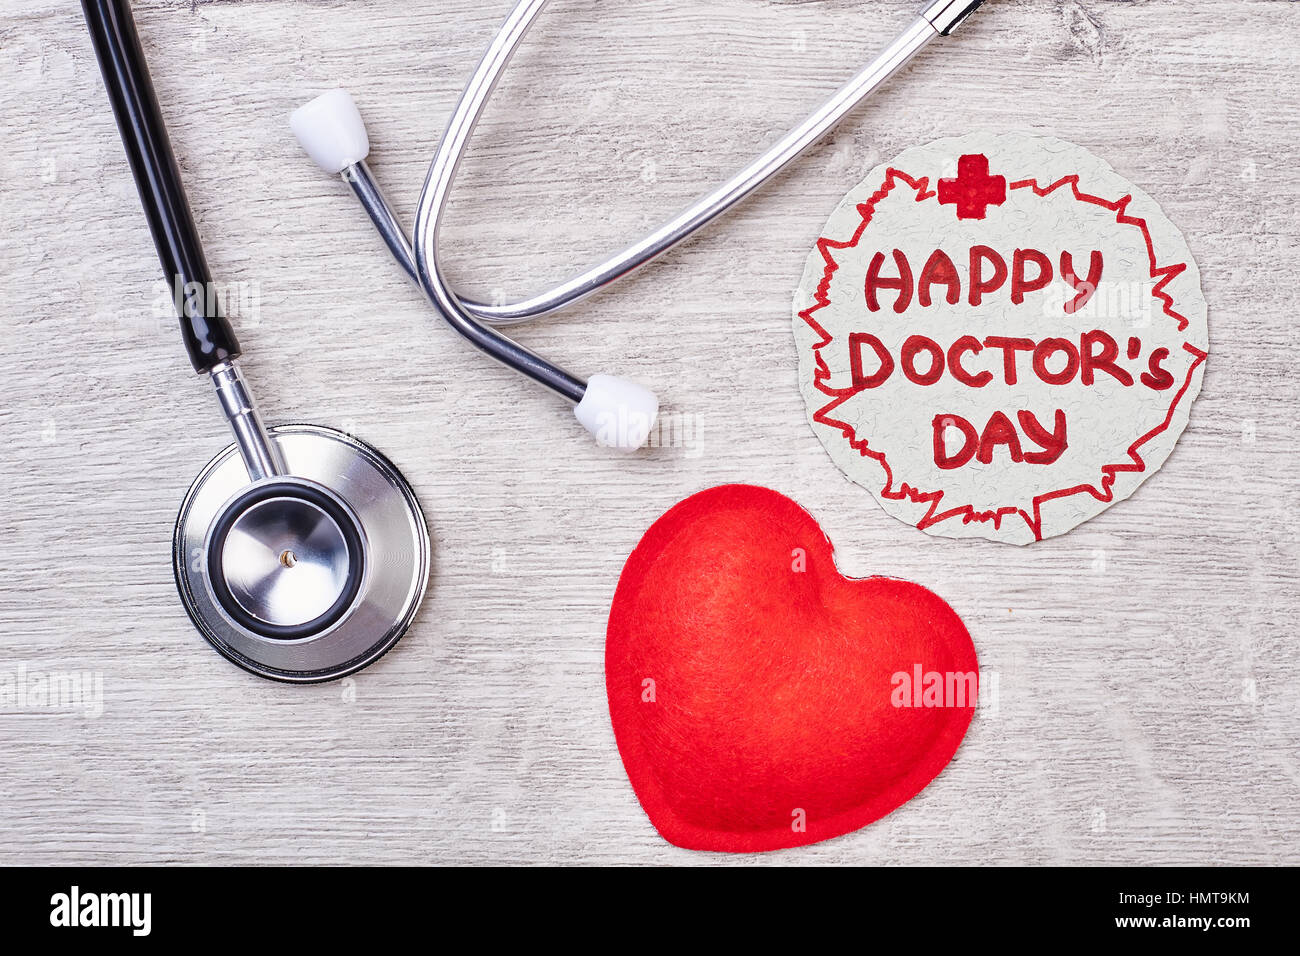 Happy Doctor's Day greeting paper Stock Photo - Alamy